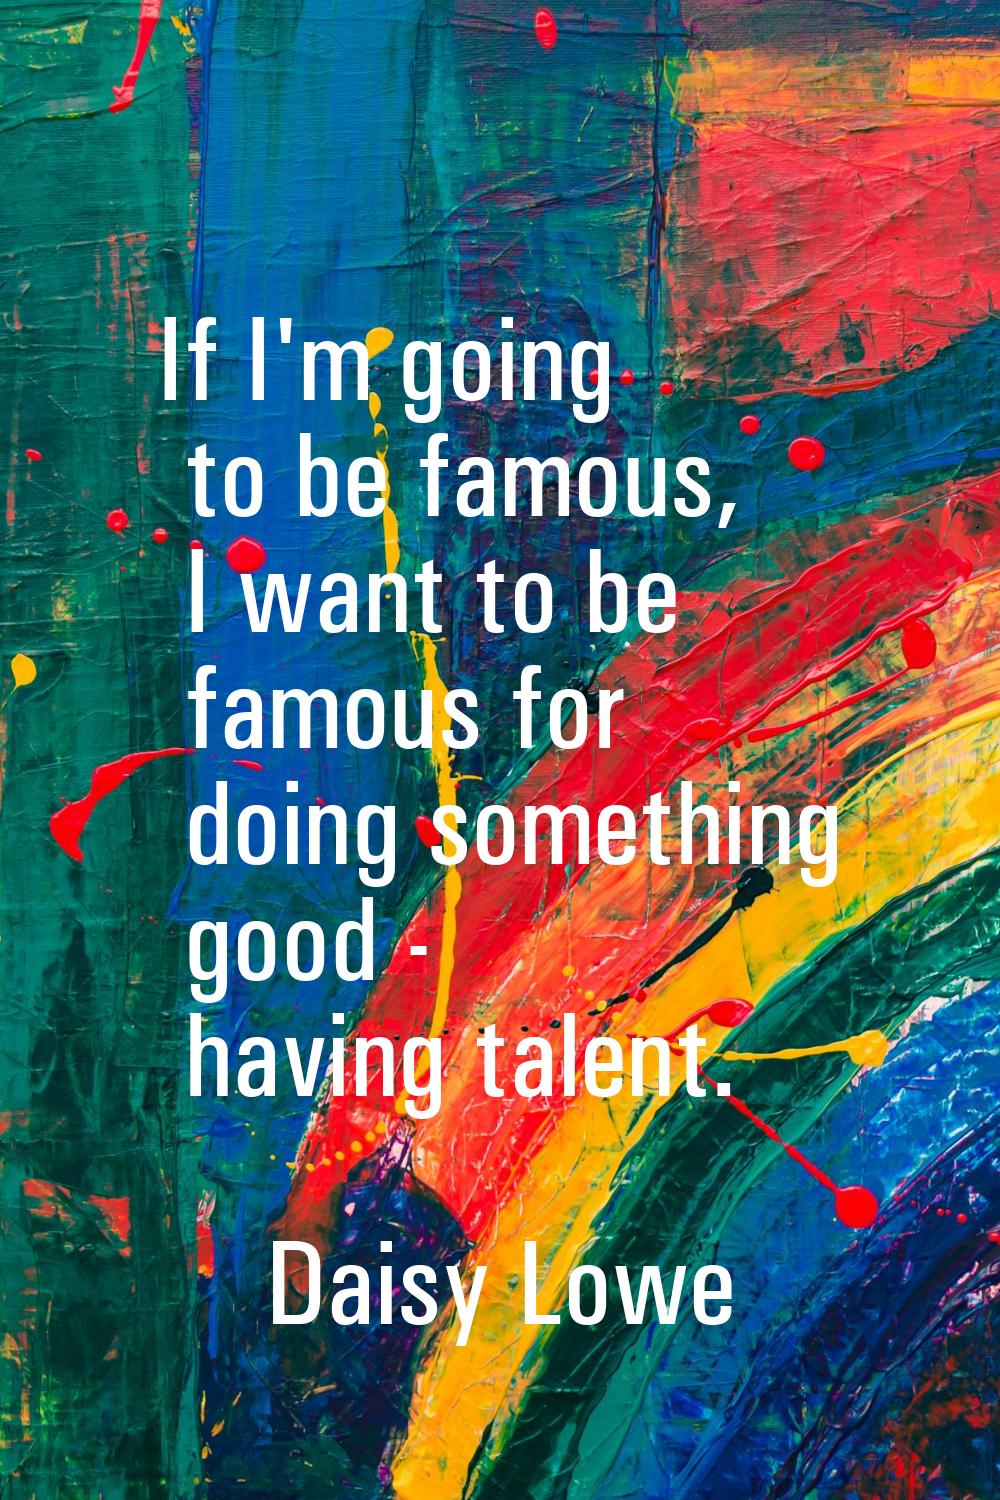 If I'm going to be famous, I want to be famous for doing something good - having talent.